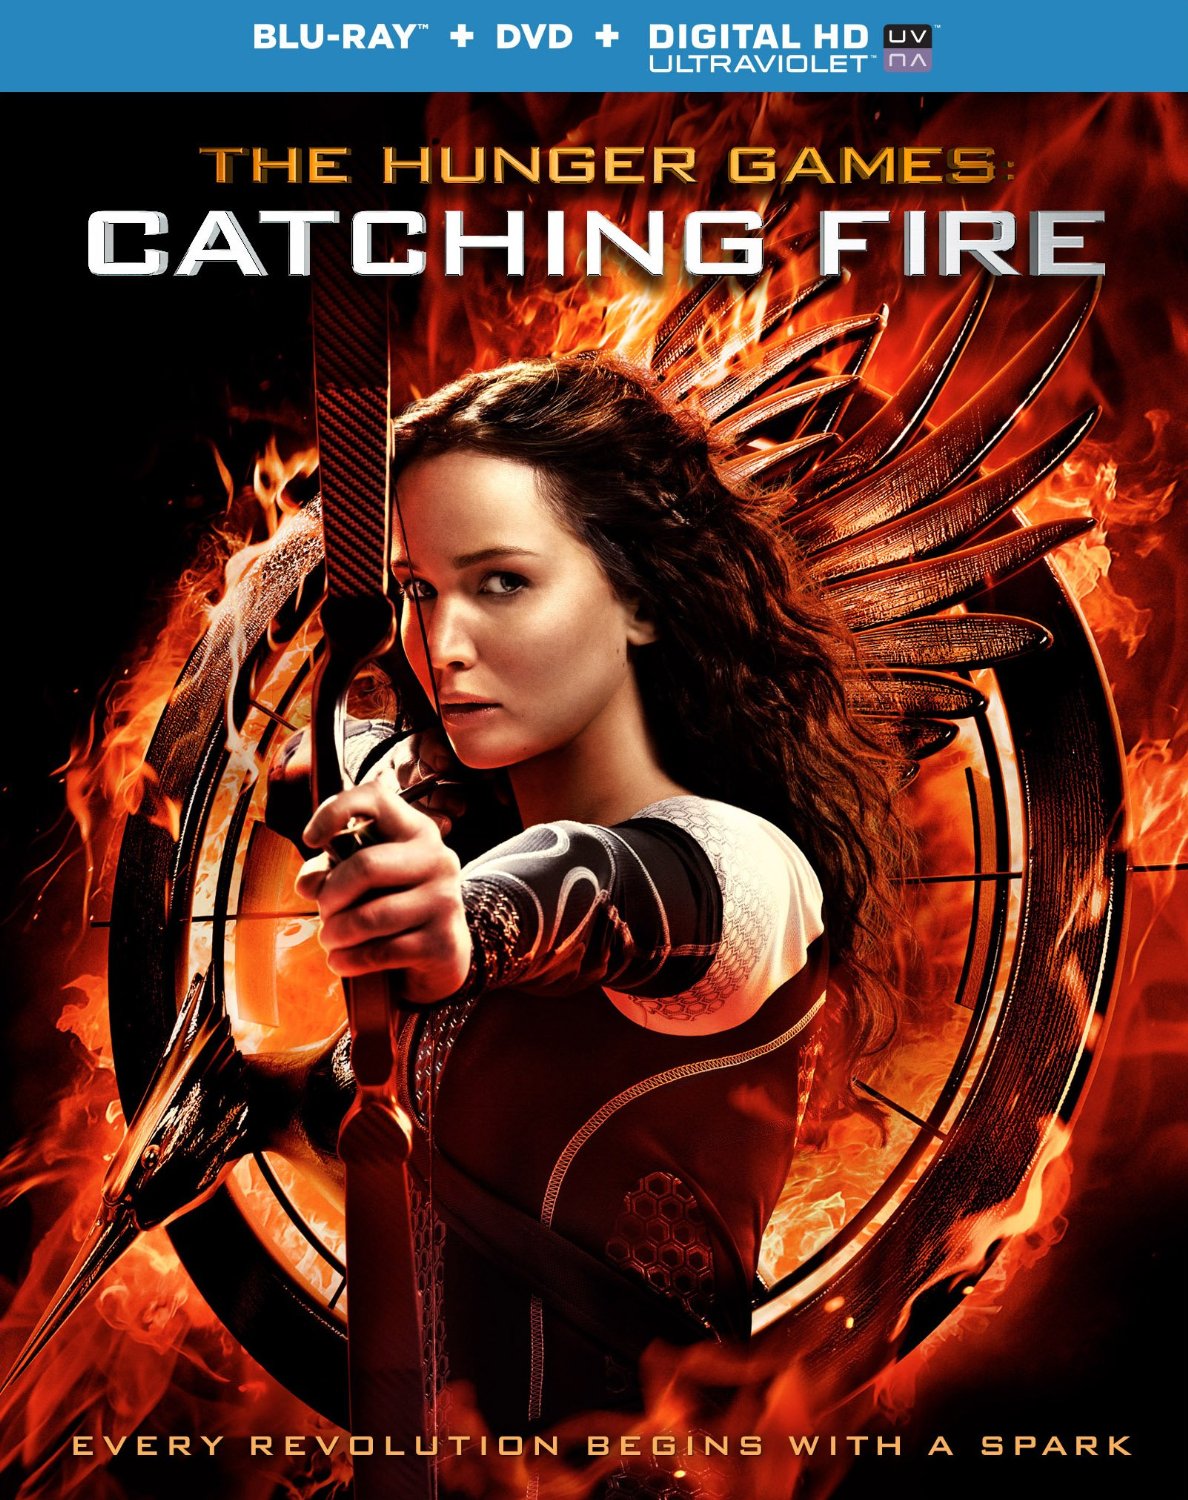 The Hunger Games: Catching Fire DVD Combo Pack Only $13.46 – 66% Savings